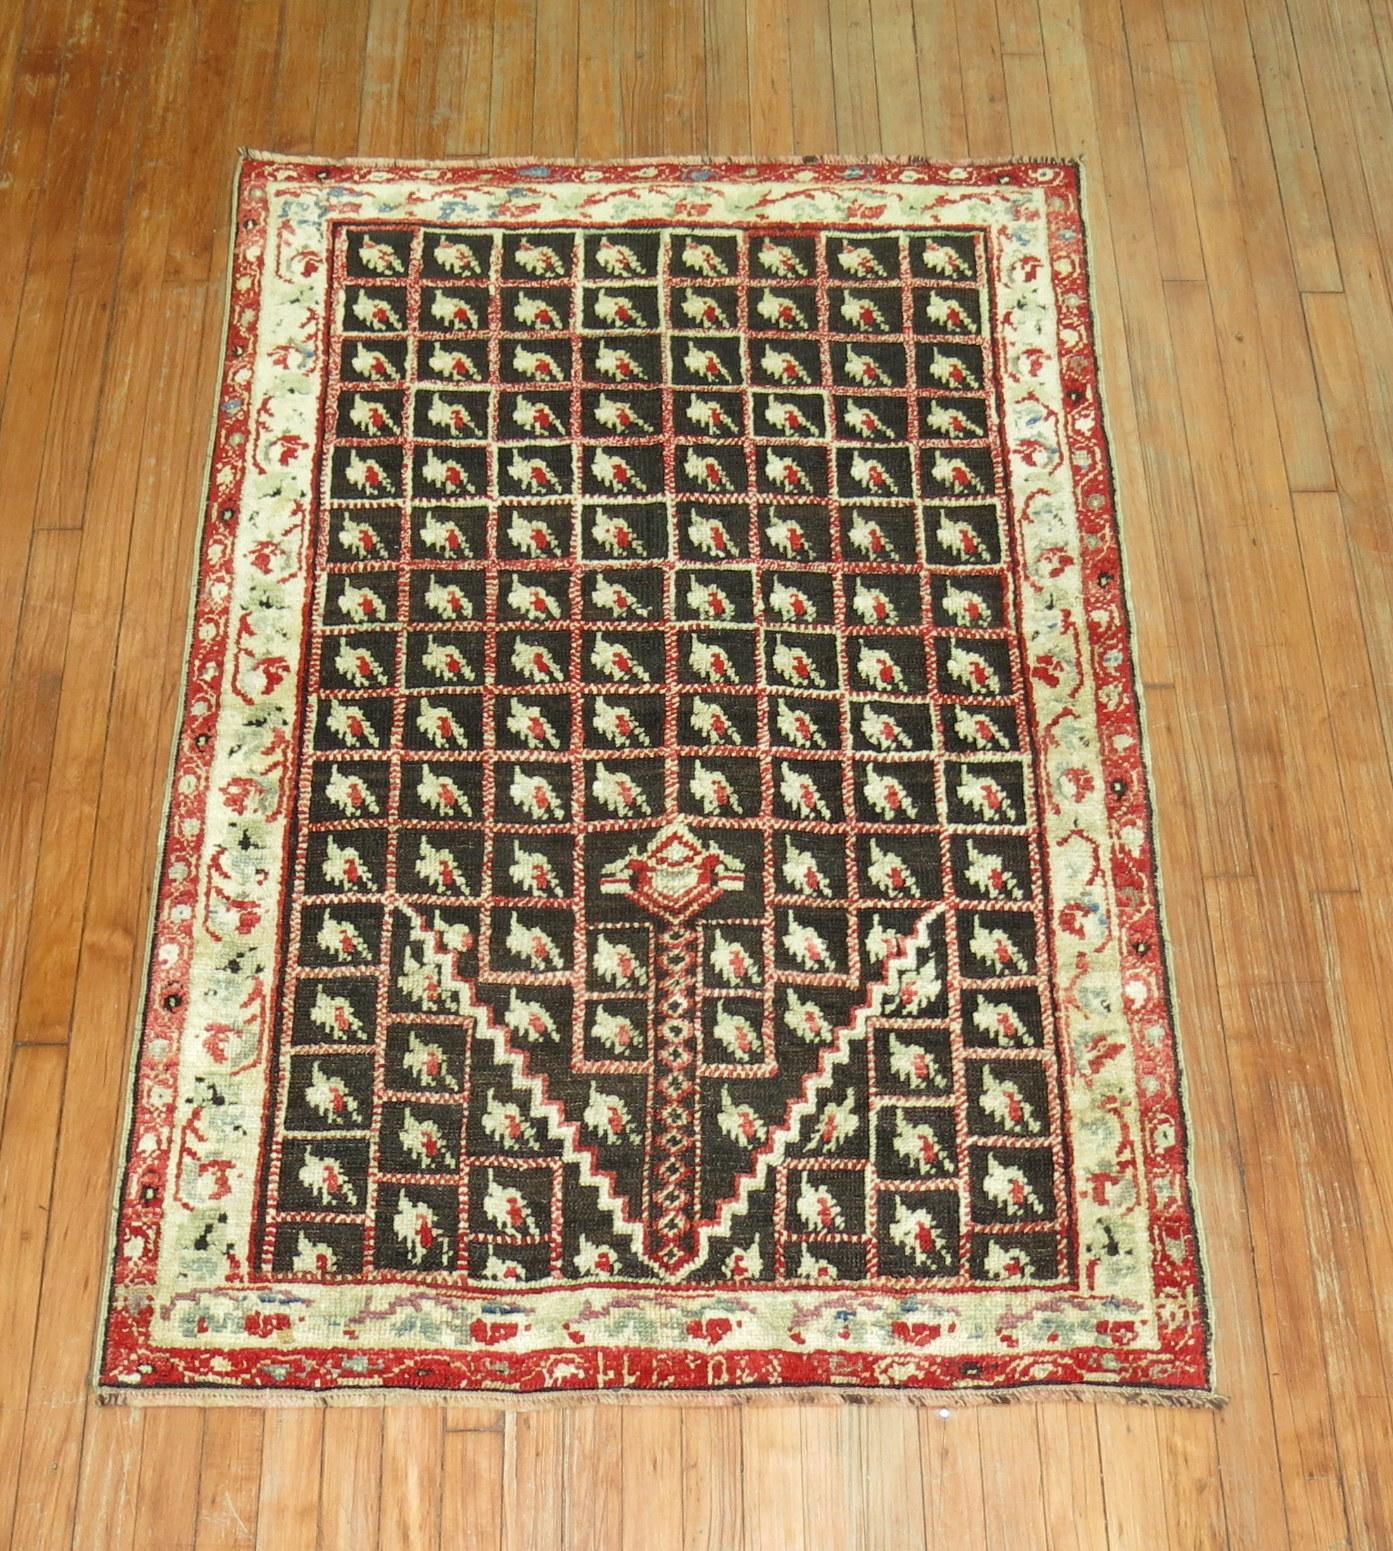 A one of a kind antique Turkish Ghiordes scatter size rug from the early 20th century.

Measures: 3'7'' x 5'4''.